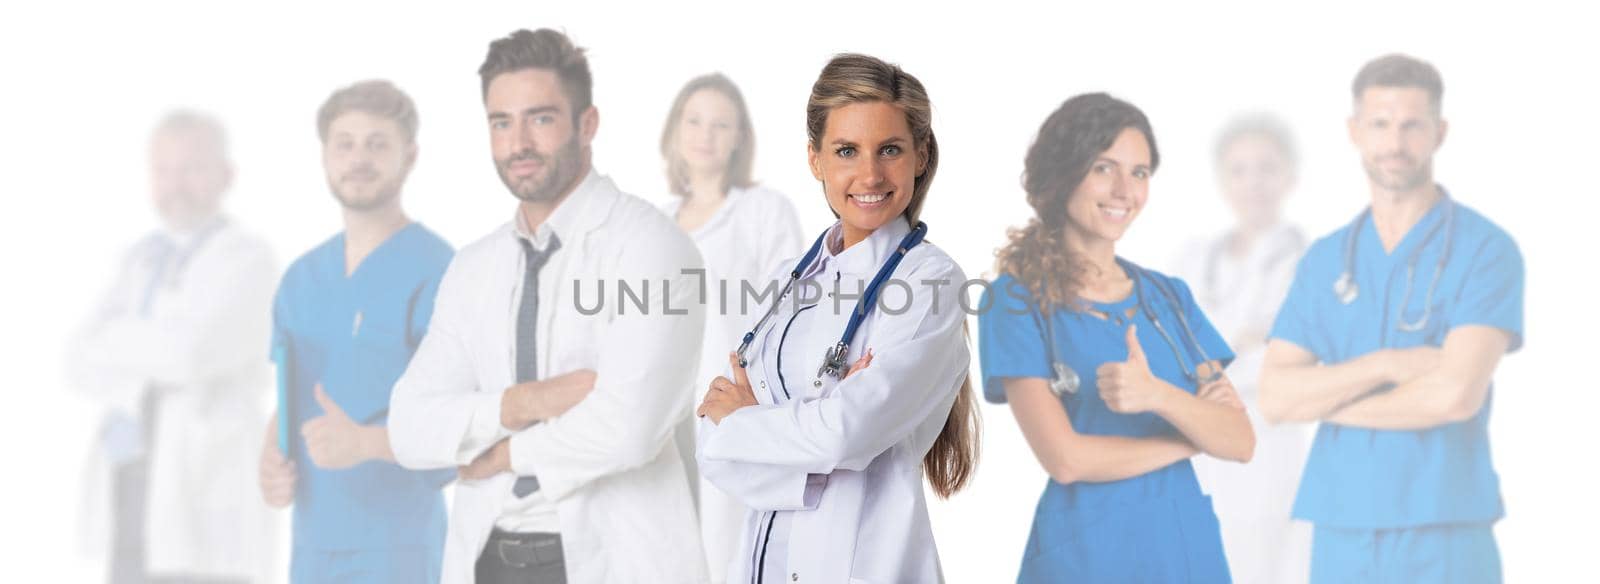 Medical workers isolated on white by ALotOfPeople